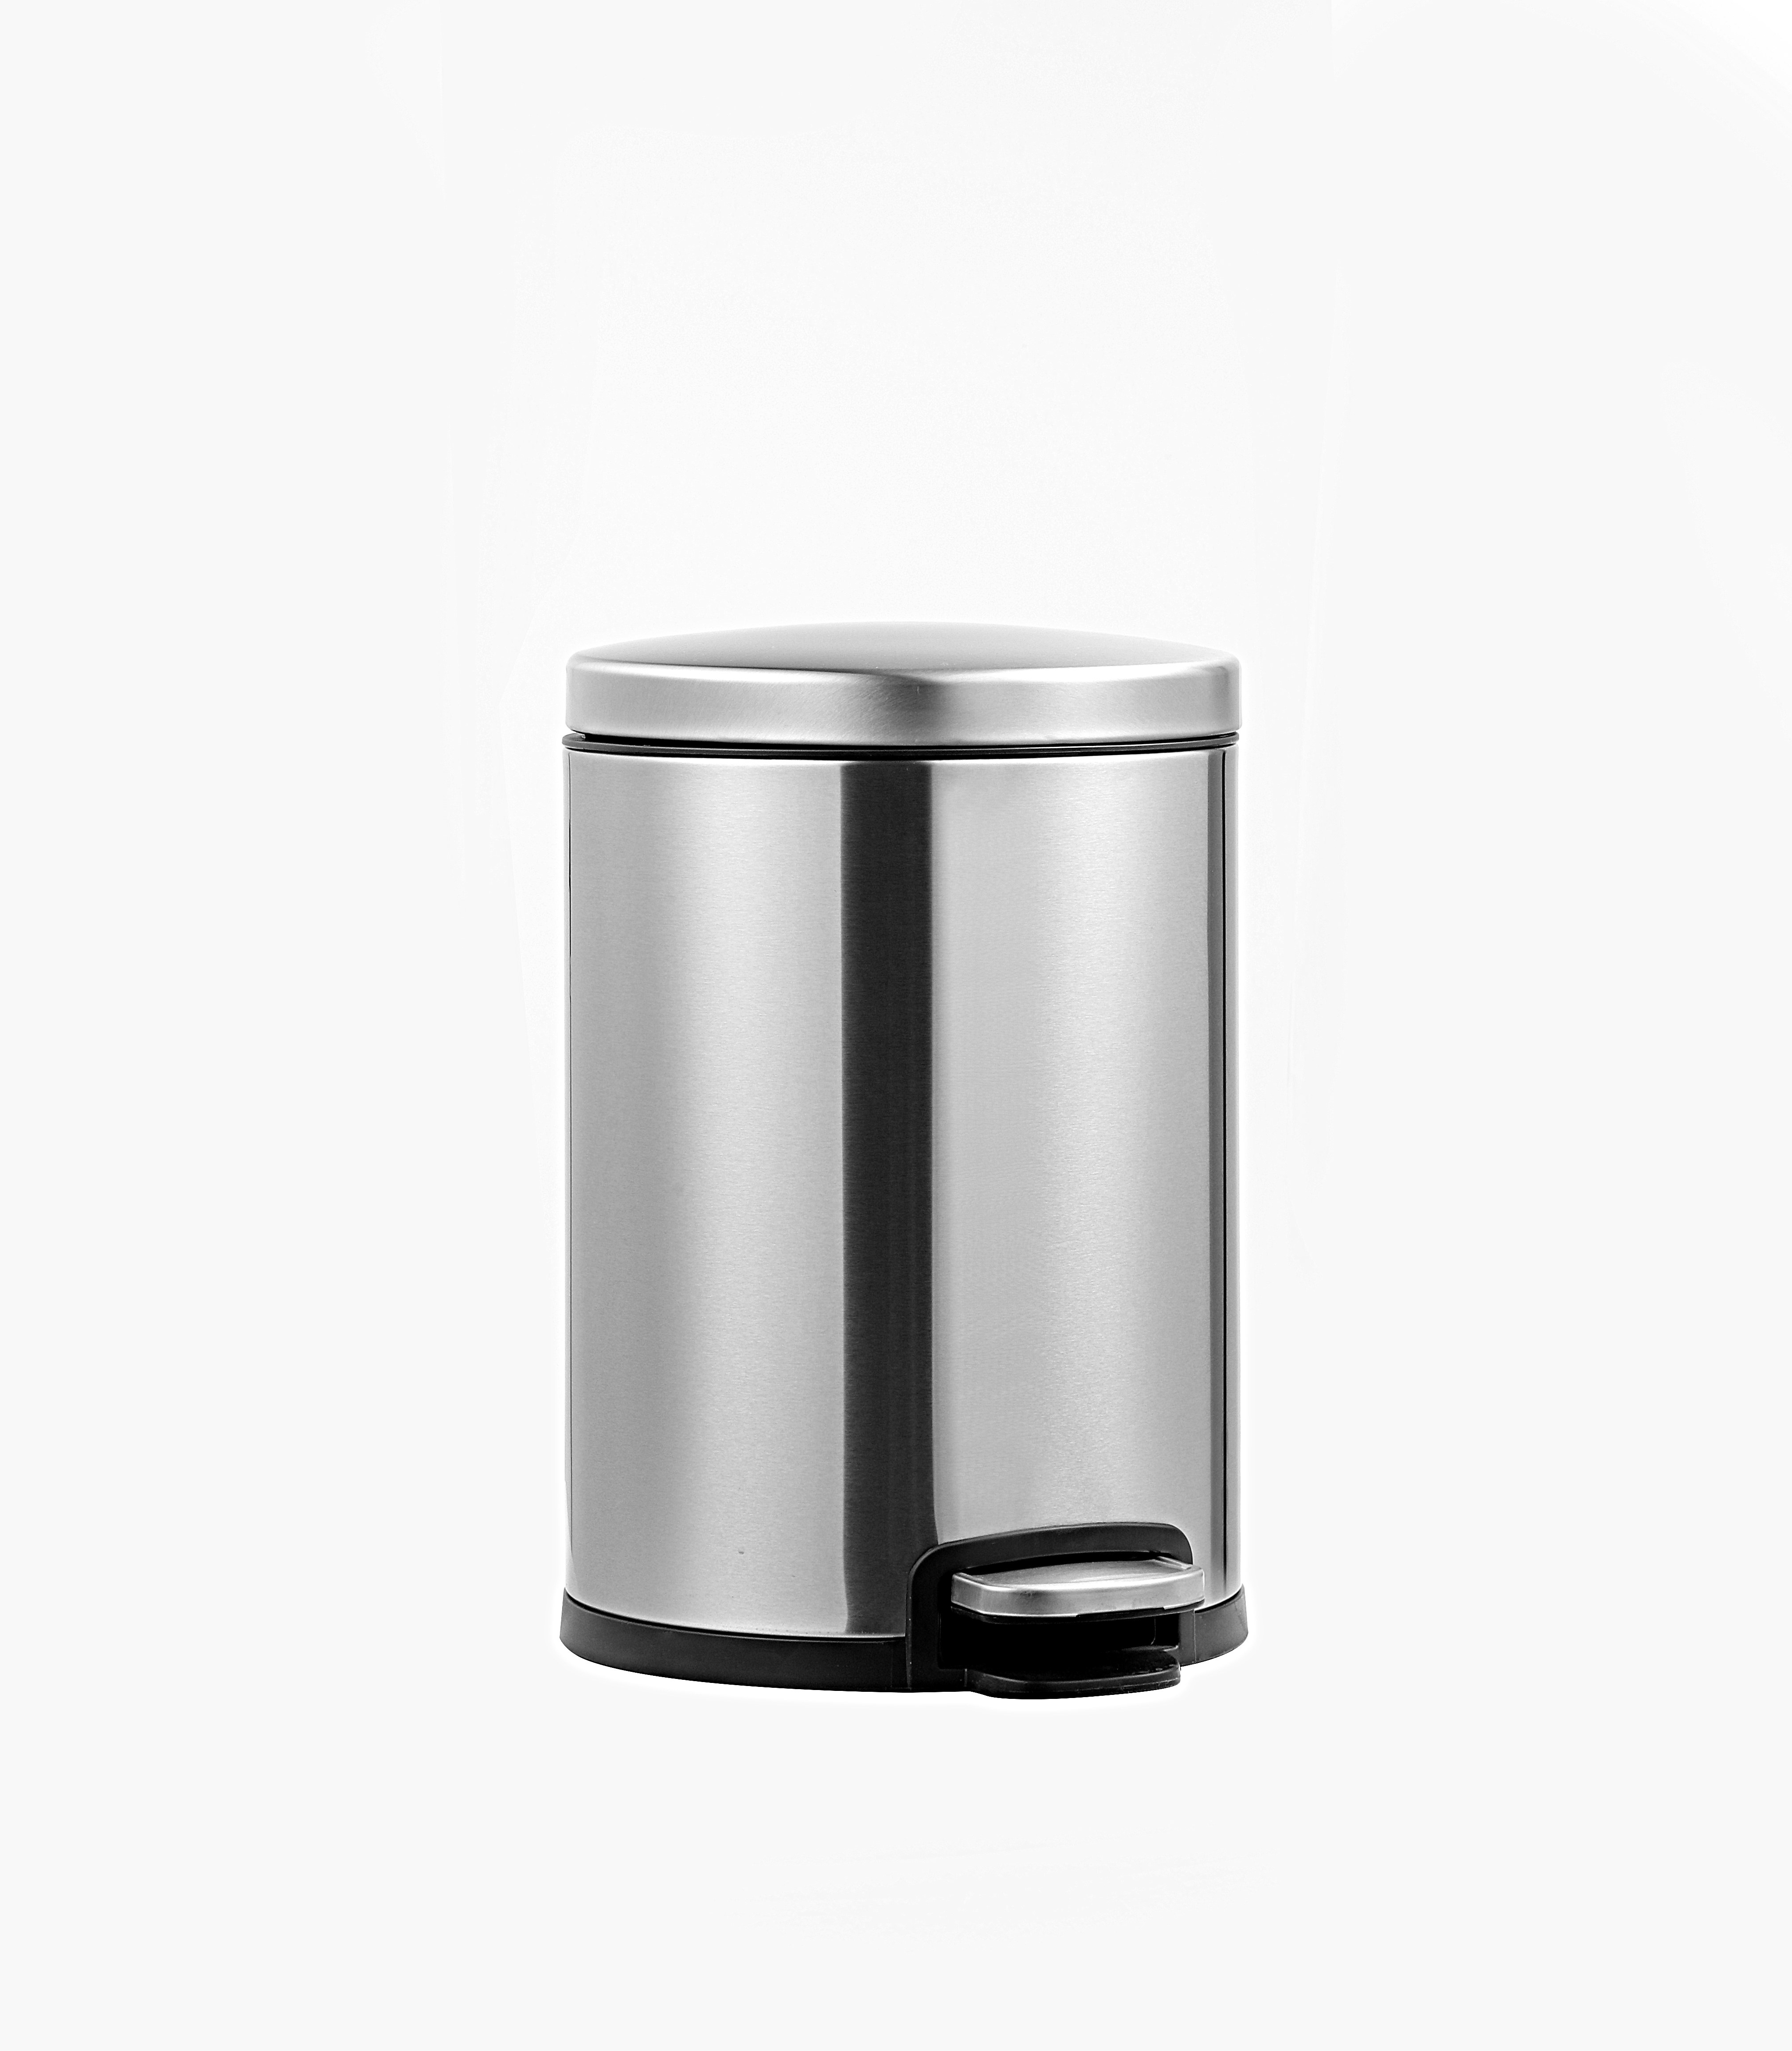 2in1 Pedal Waste Bin with 10LITER (KL-8010)